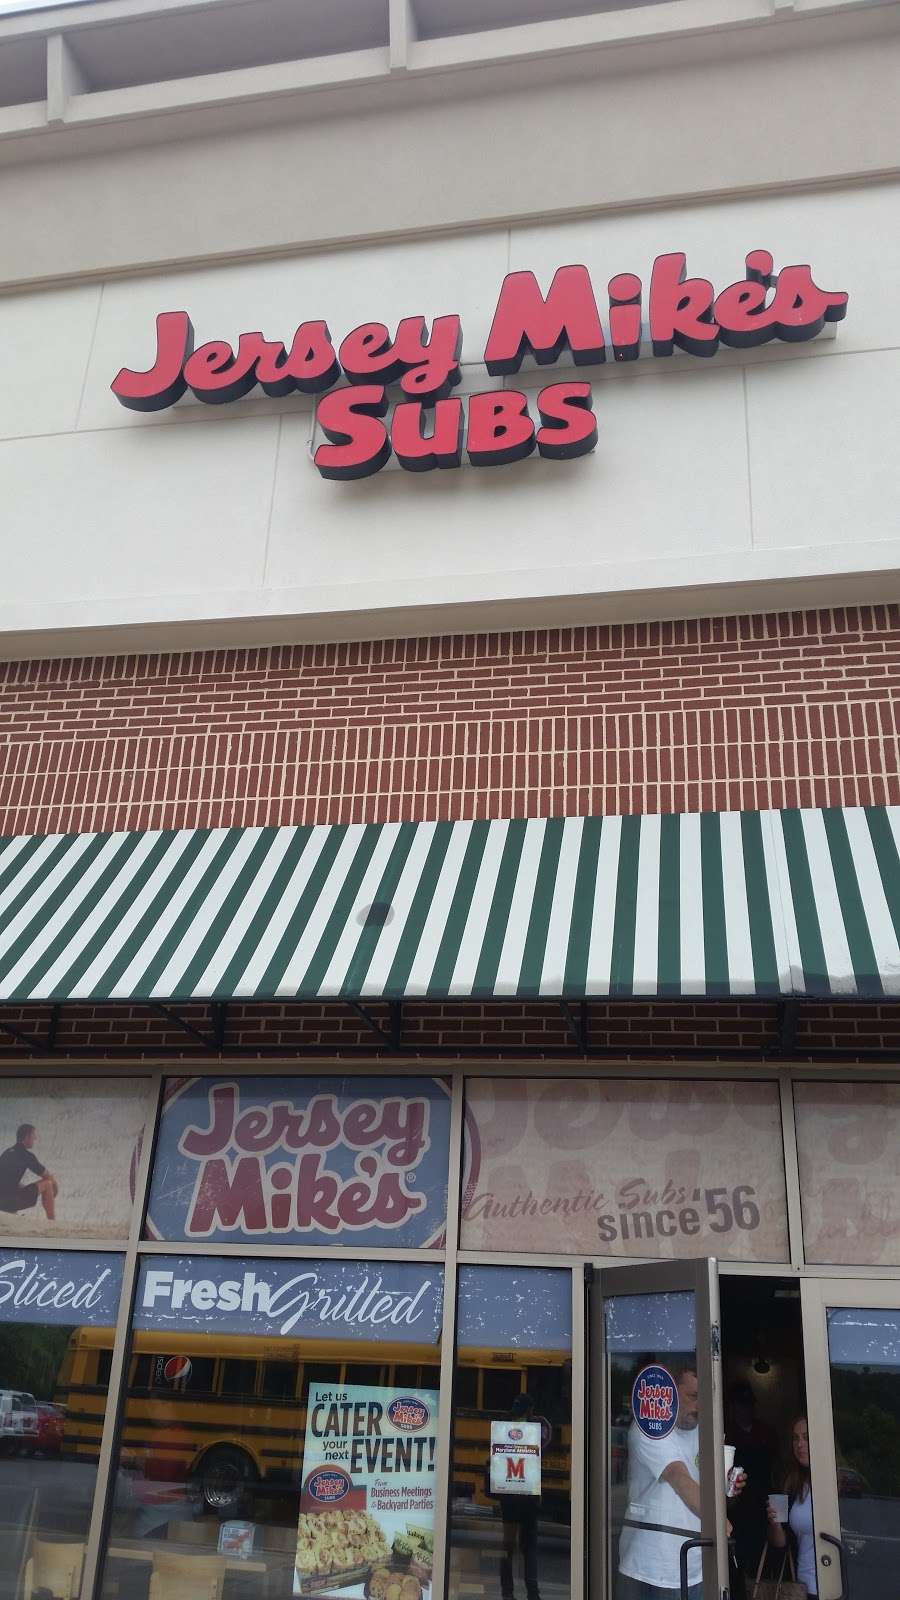 Jersey Mikes Subs | 18015 Garland Groh Blvd, Hagerstown, MD 21740 | Phone: (301) 393-9495